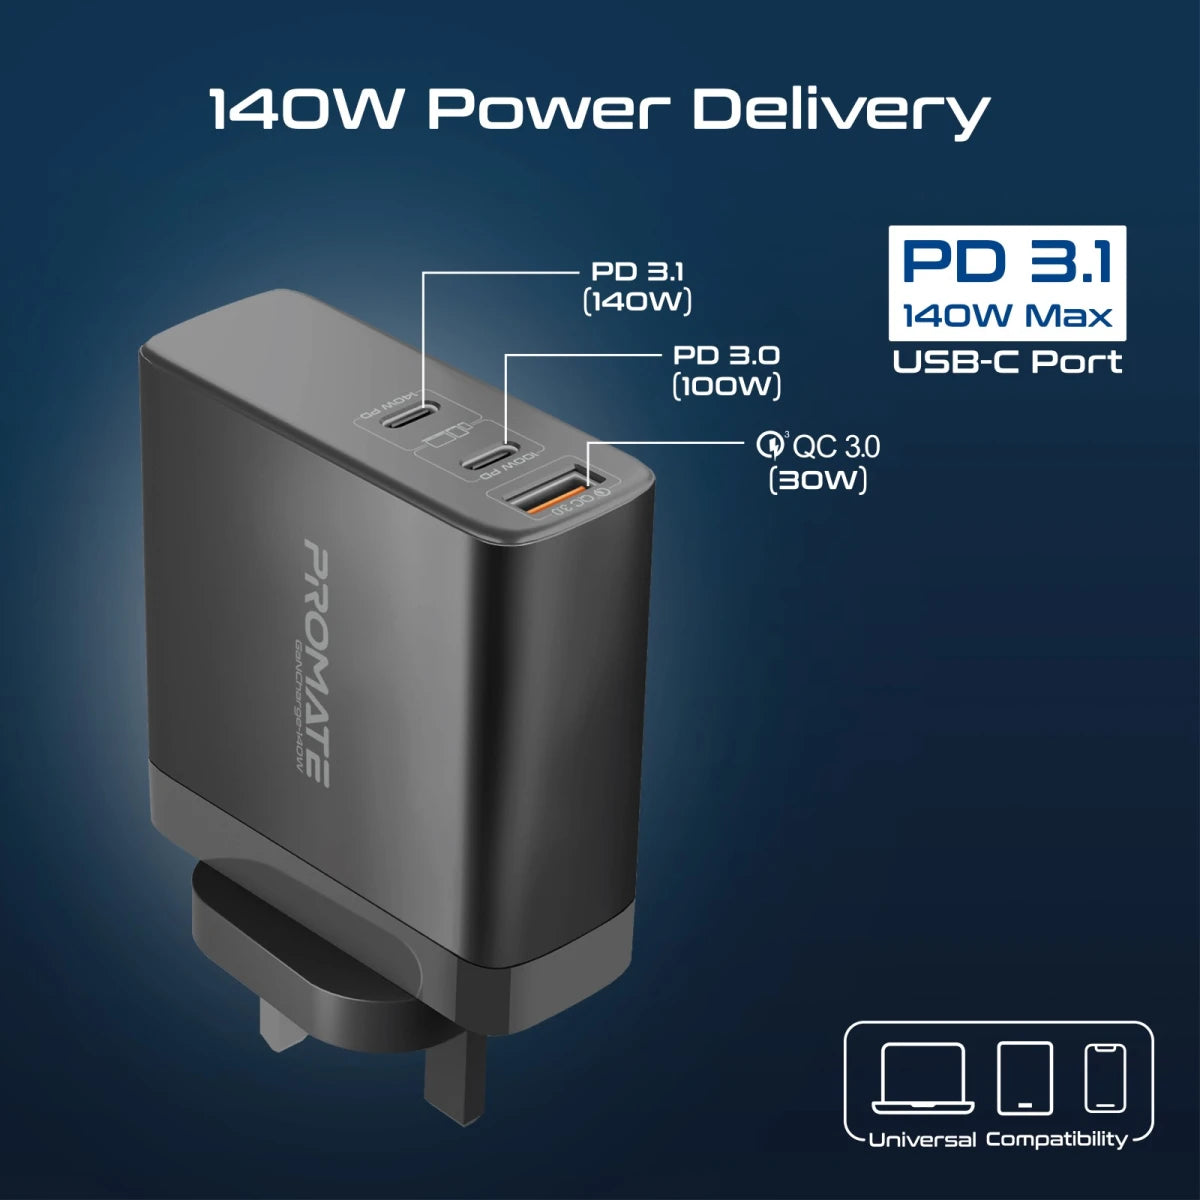 Promate GaNCharge-140W USB-C Wall Charger with 30W QC 3.0 Port